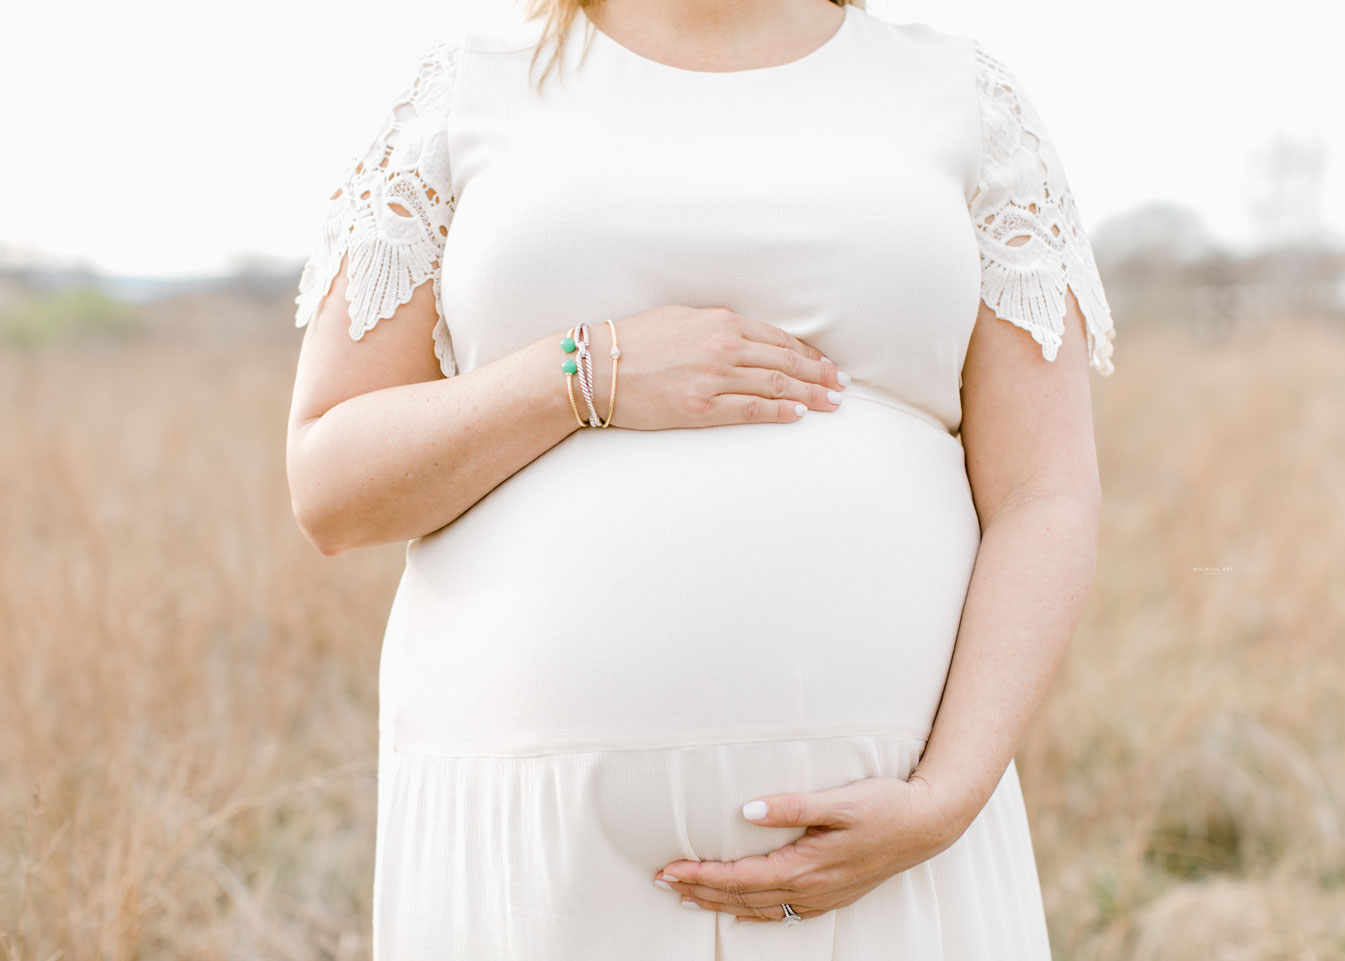 Miller Glimpse | Roanoke Maternity Session | Whimsee Art Photography